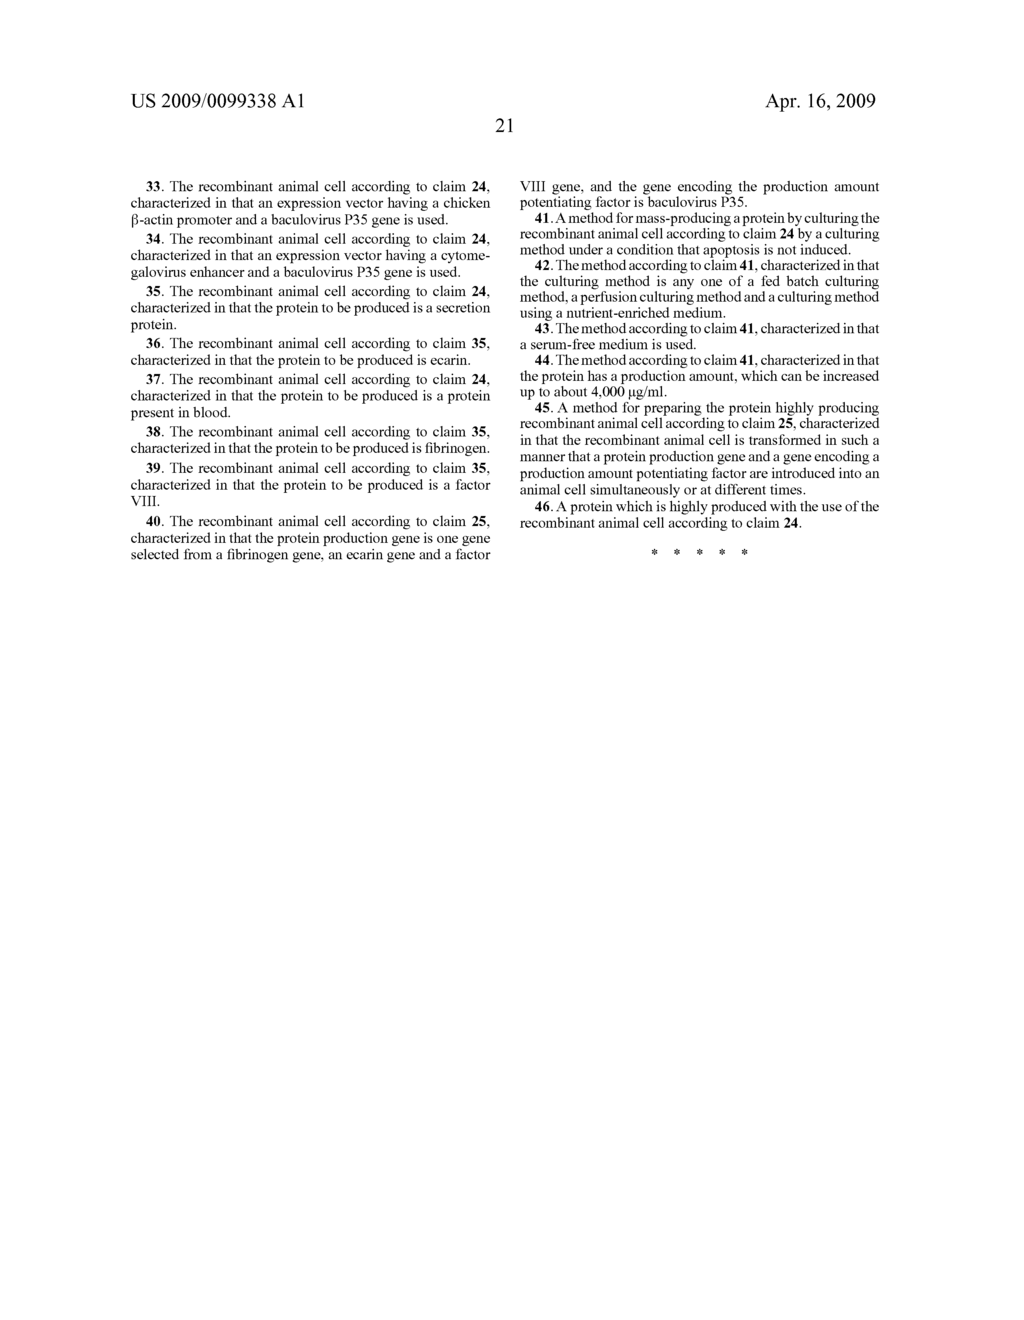 Novel Protein Highly Producing Recombinant Animal Cell, Method for Preparing the Same, and Method for Mass-Producing Protein Using the Same - diagram, schematic, and image 28